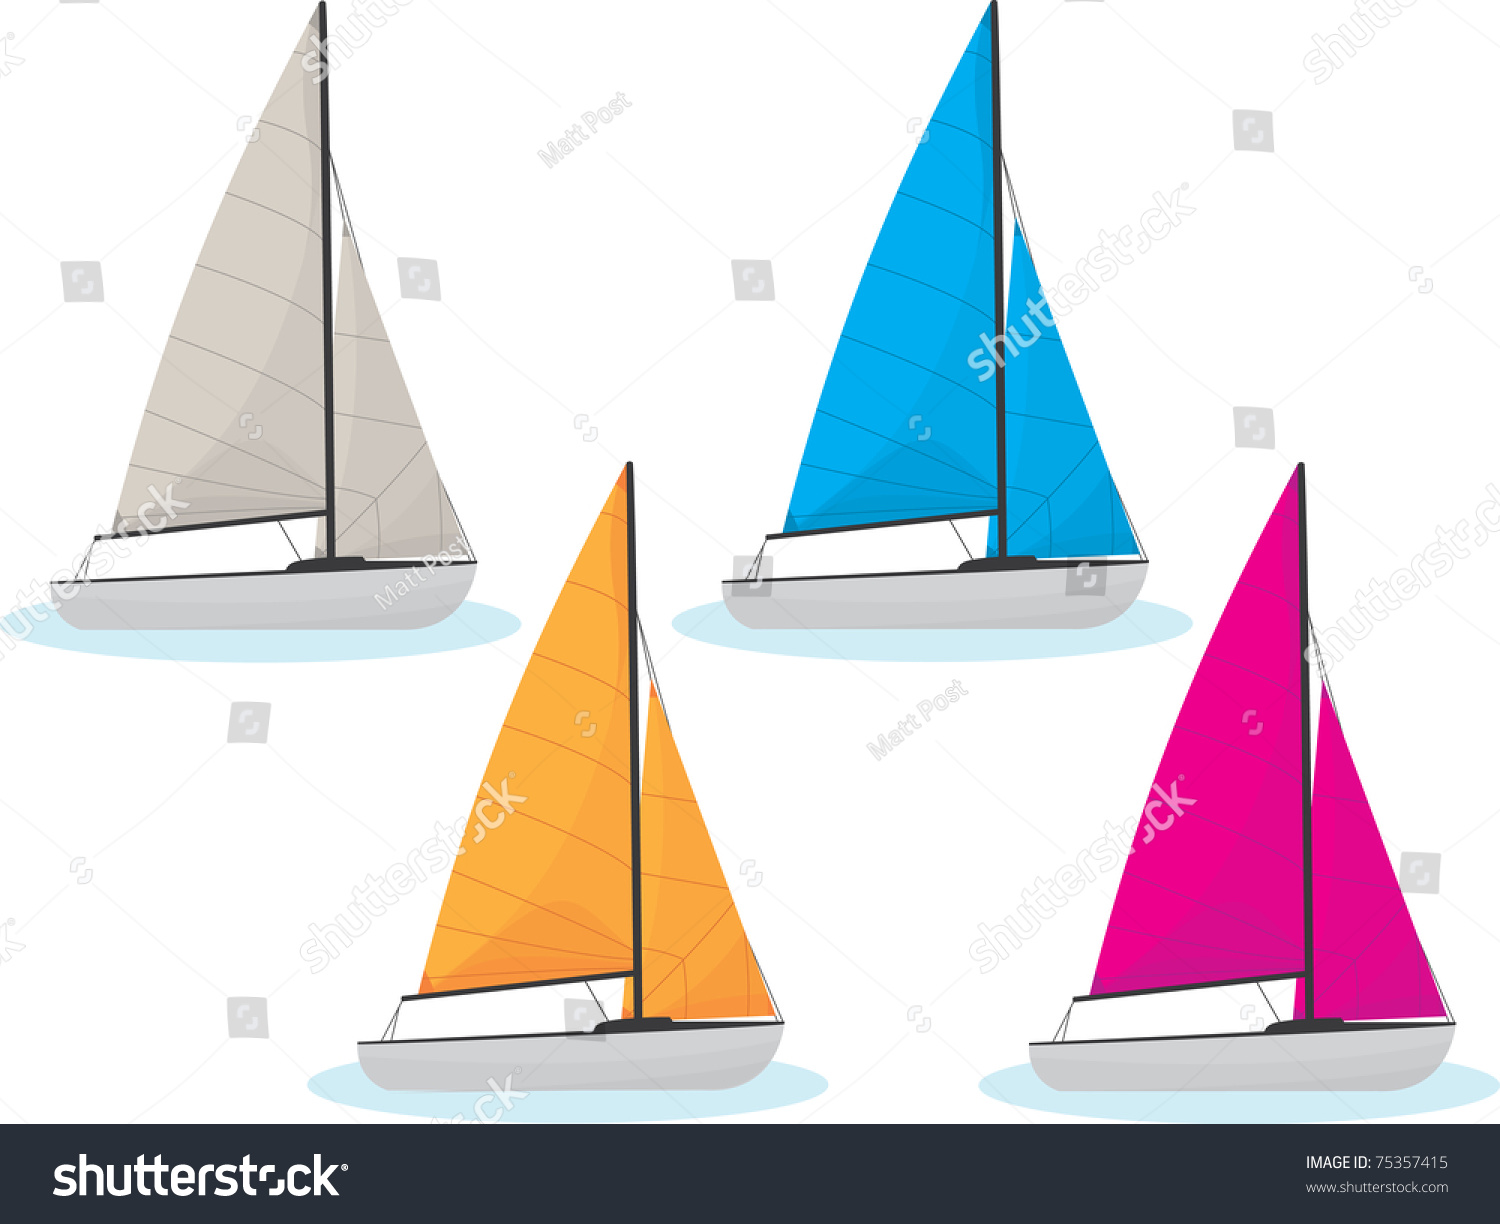 SVG of Sailing boats in four different colors svg